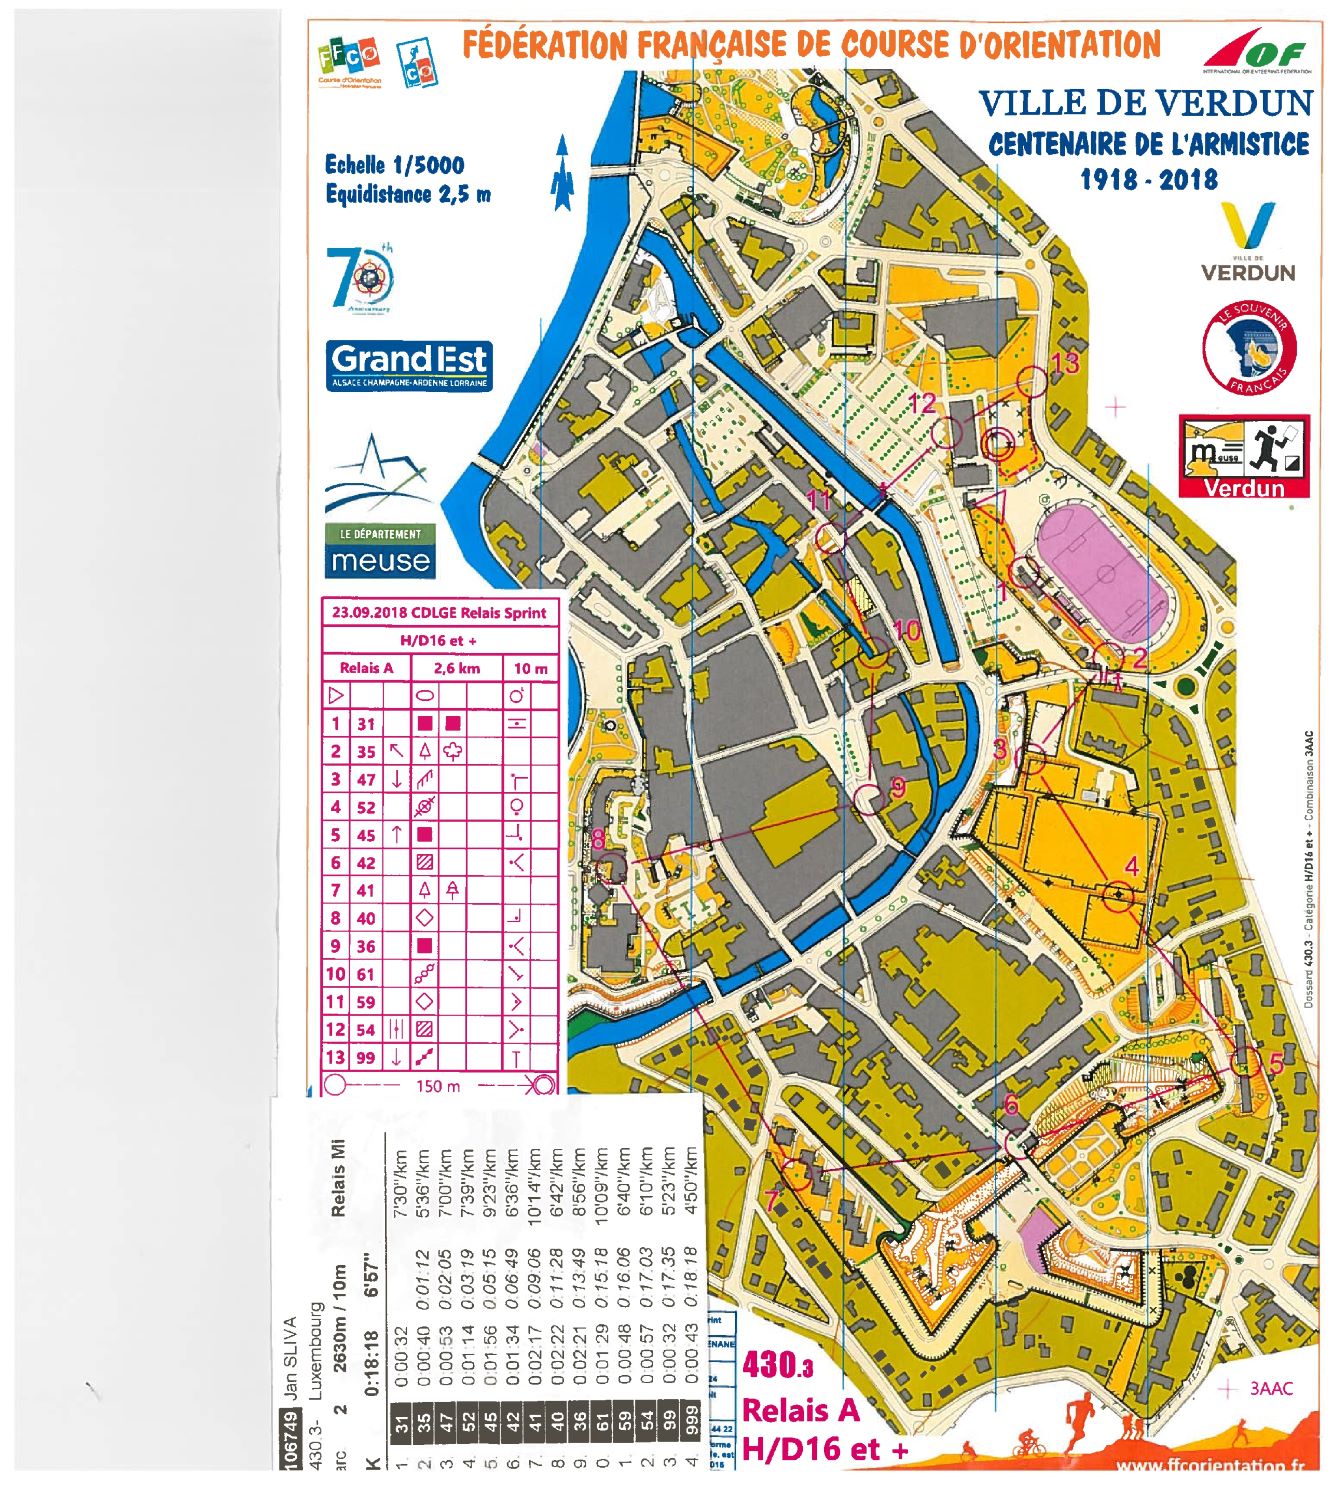 Mixed Sprint Relay - Championship of the Grand-Est Region (24/09/2018)